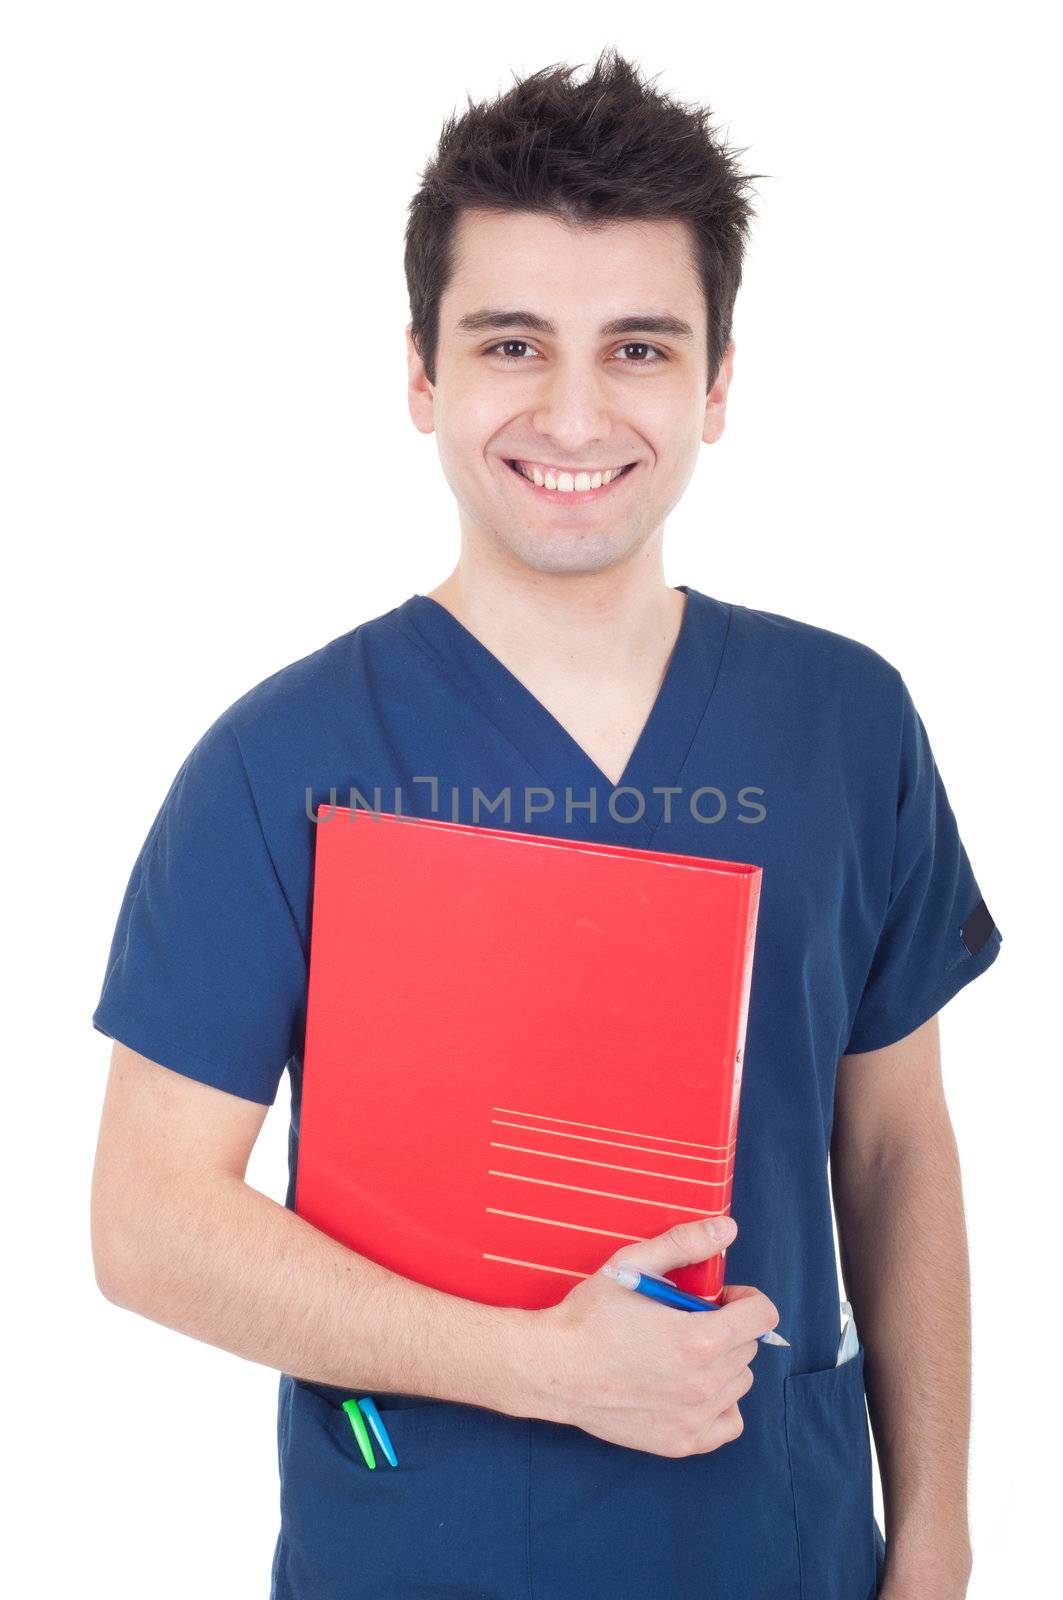 smiling handsome male doctor holding folder isolated on white background